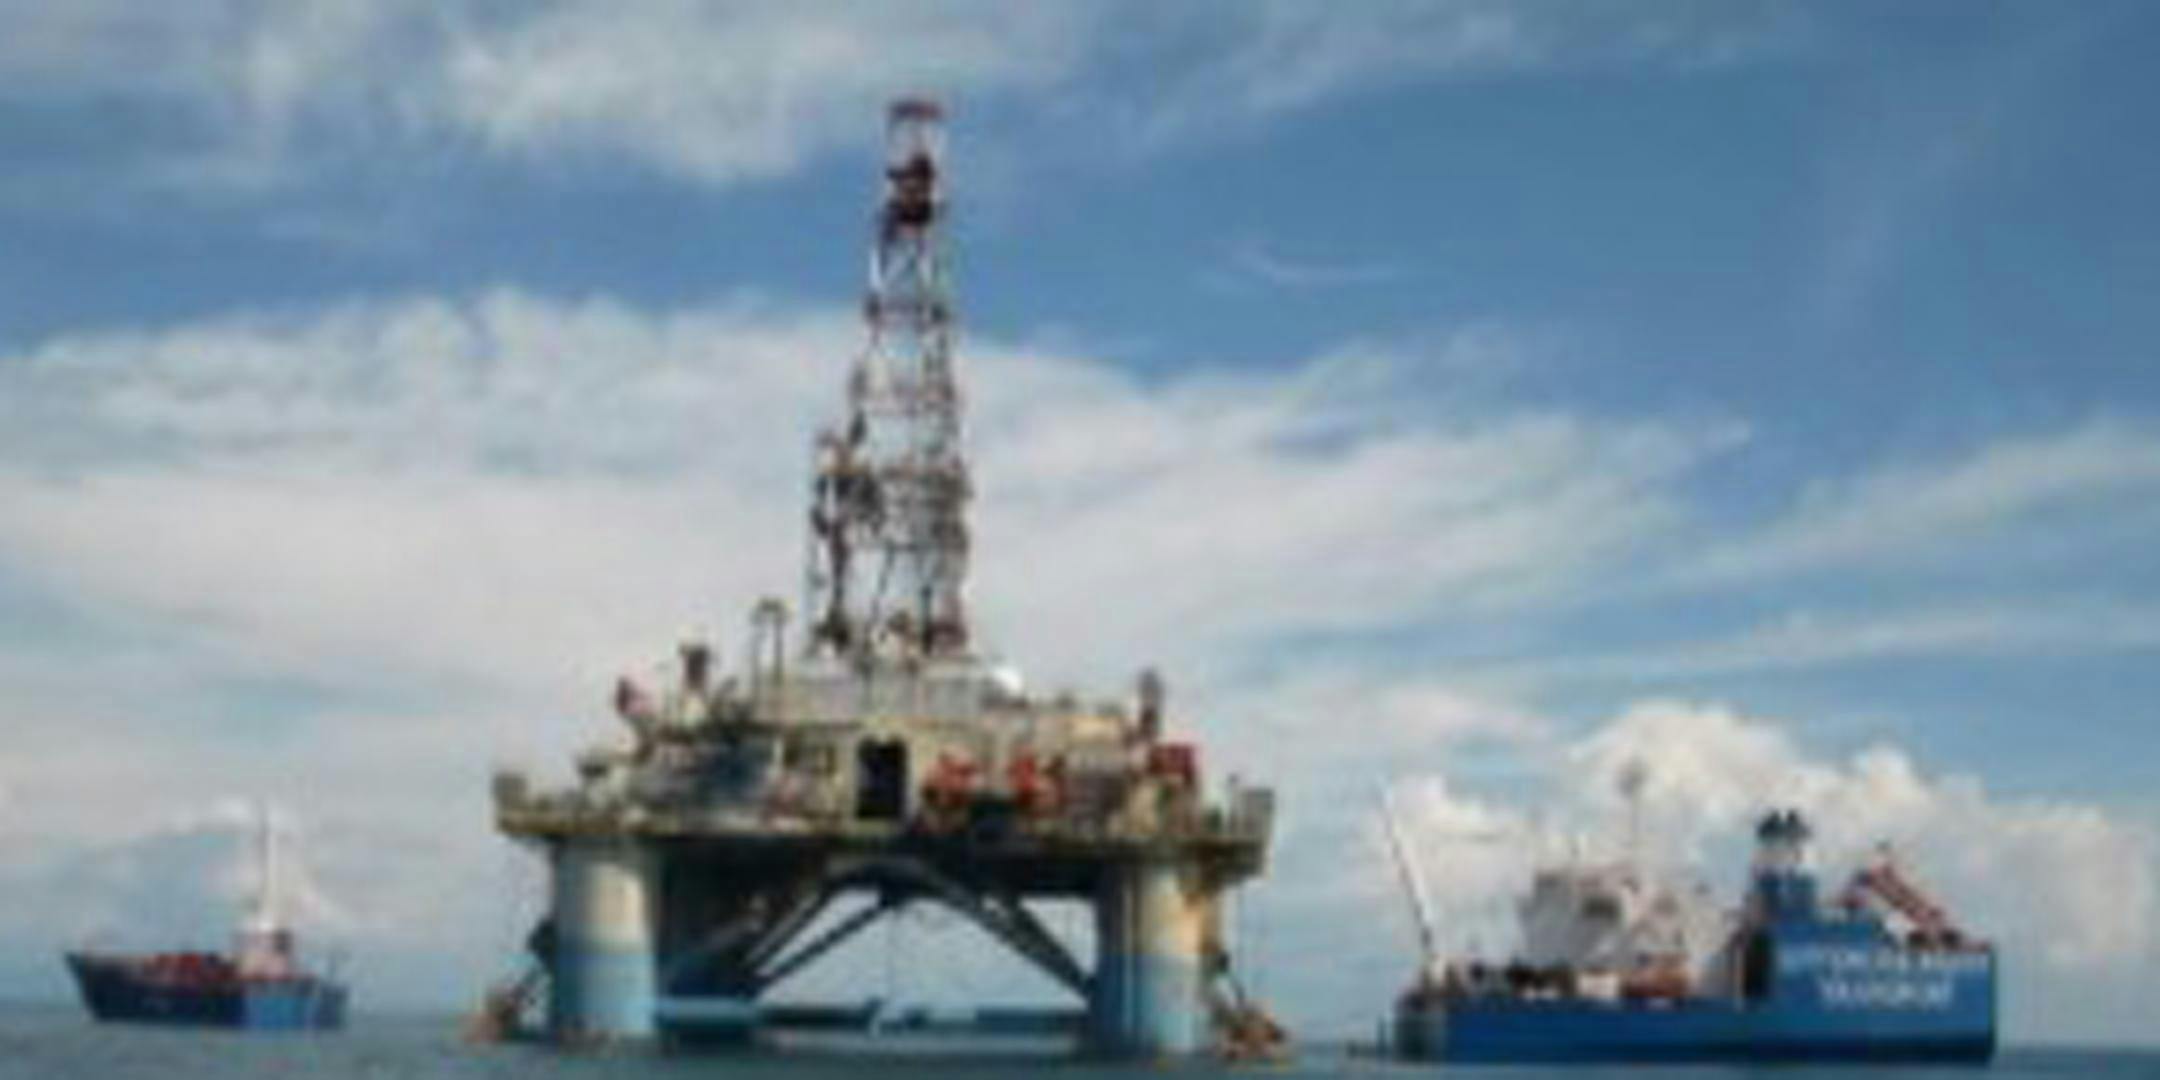 Offshore and Deepwater Drilling Operations: Mexico City